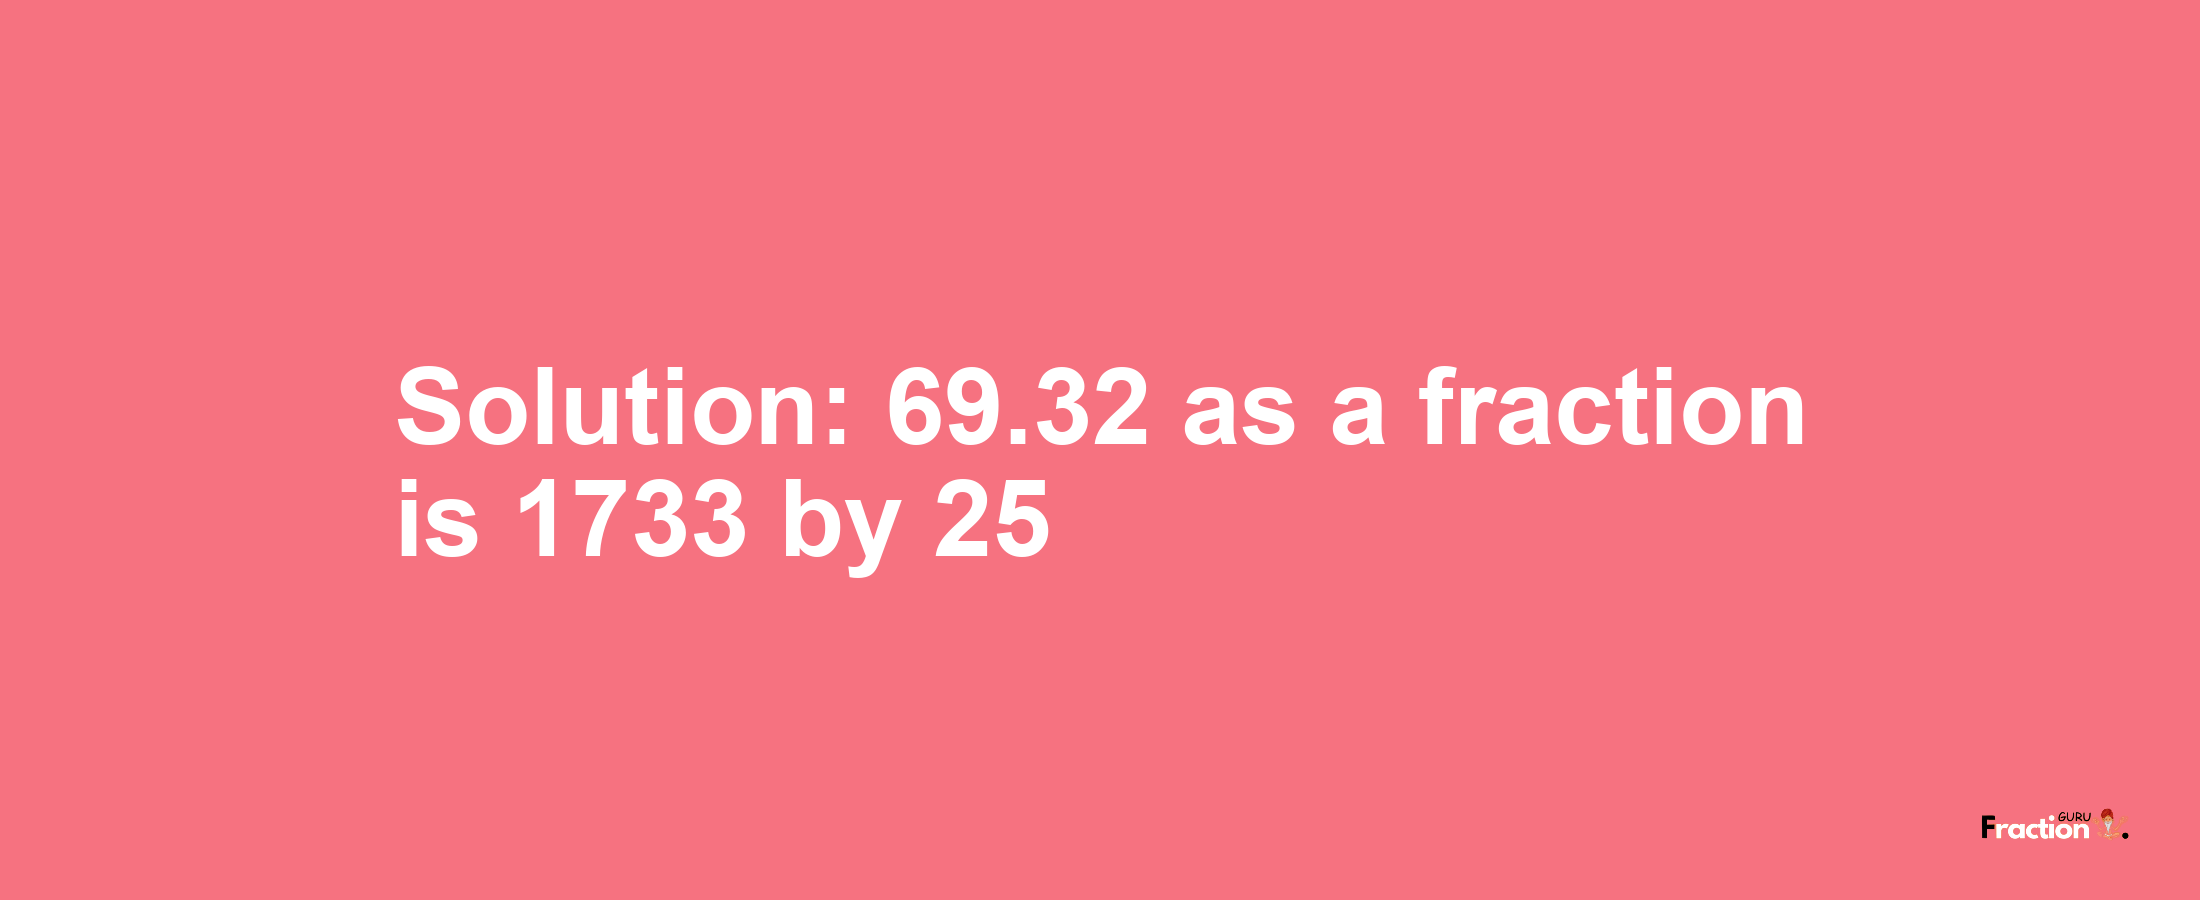 Solution:69.32 as a fraction is 1733/25